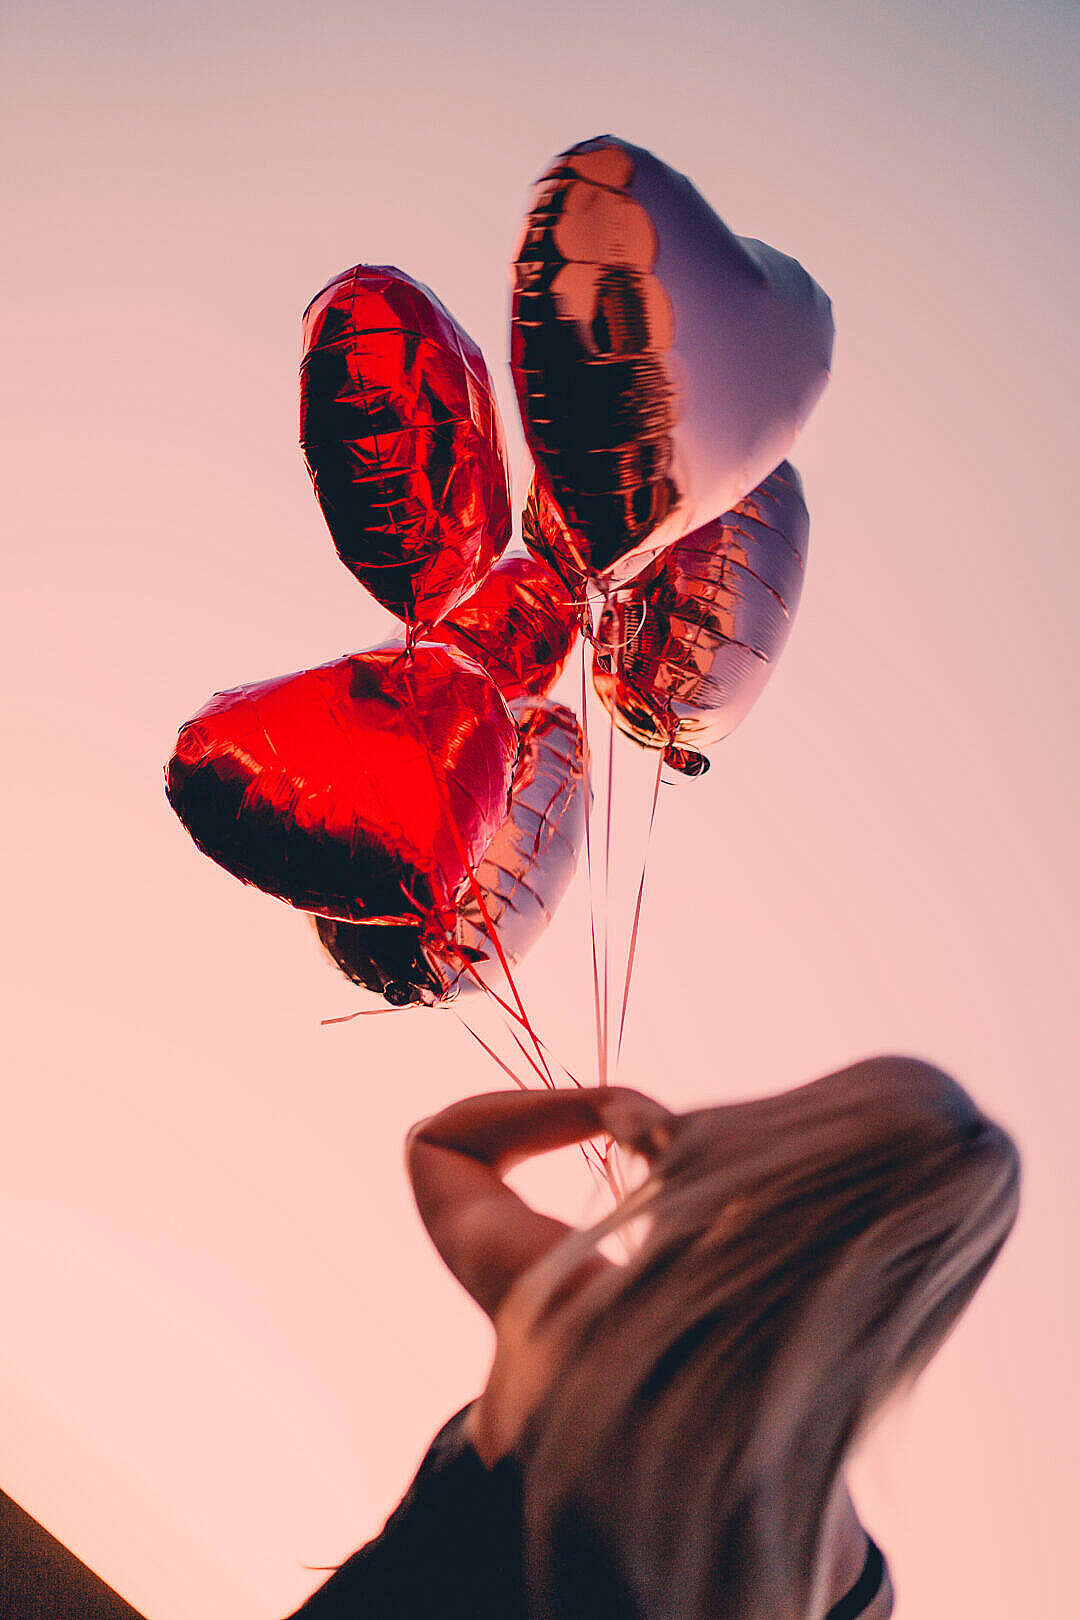 Download Woman in Love Holding Heart Shaped Balloons Outdoors FREE Stock Photo